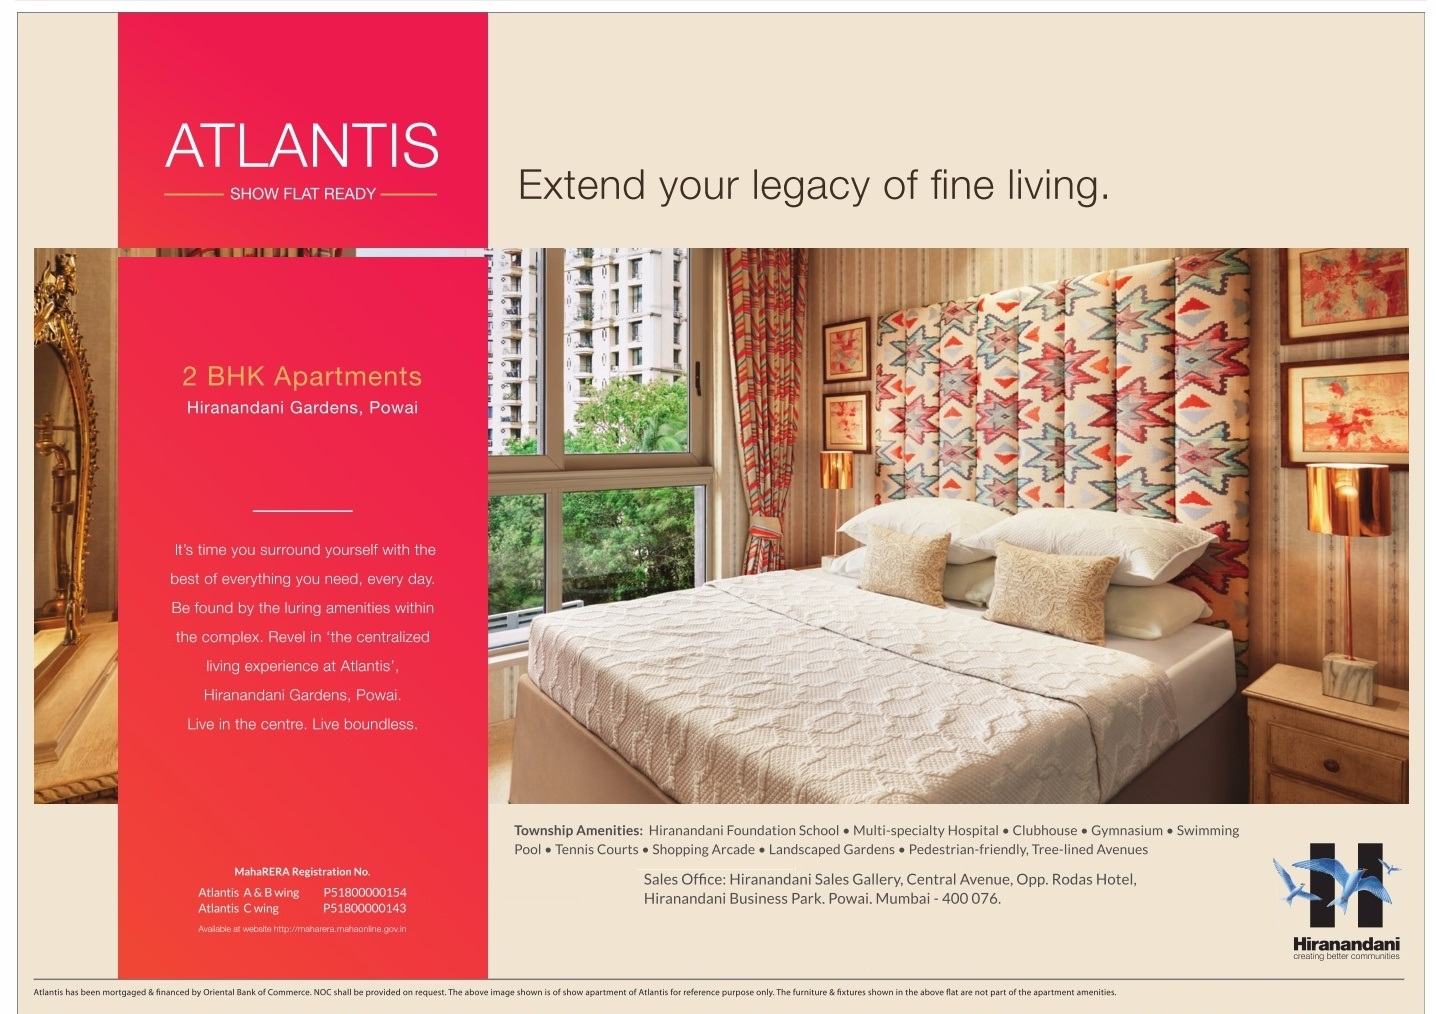 Extend your legacy of fine living at Hiranandani Atlantis in Mumbai Update